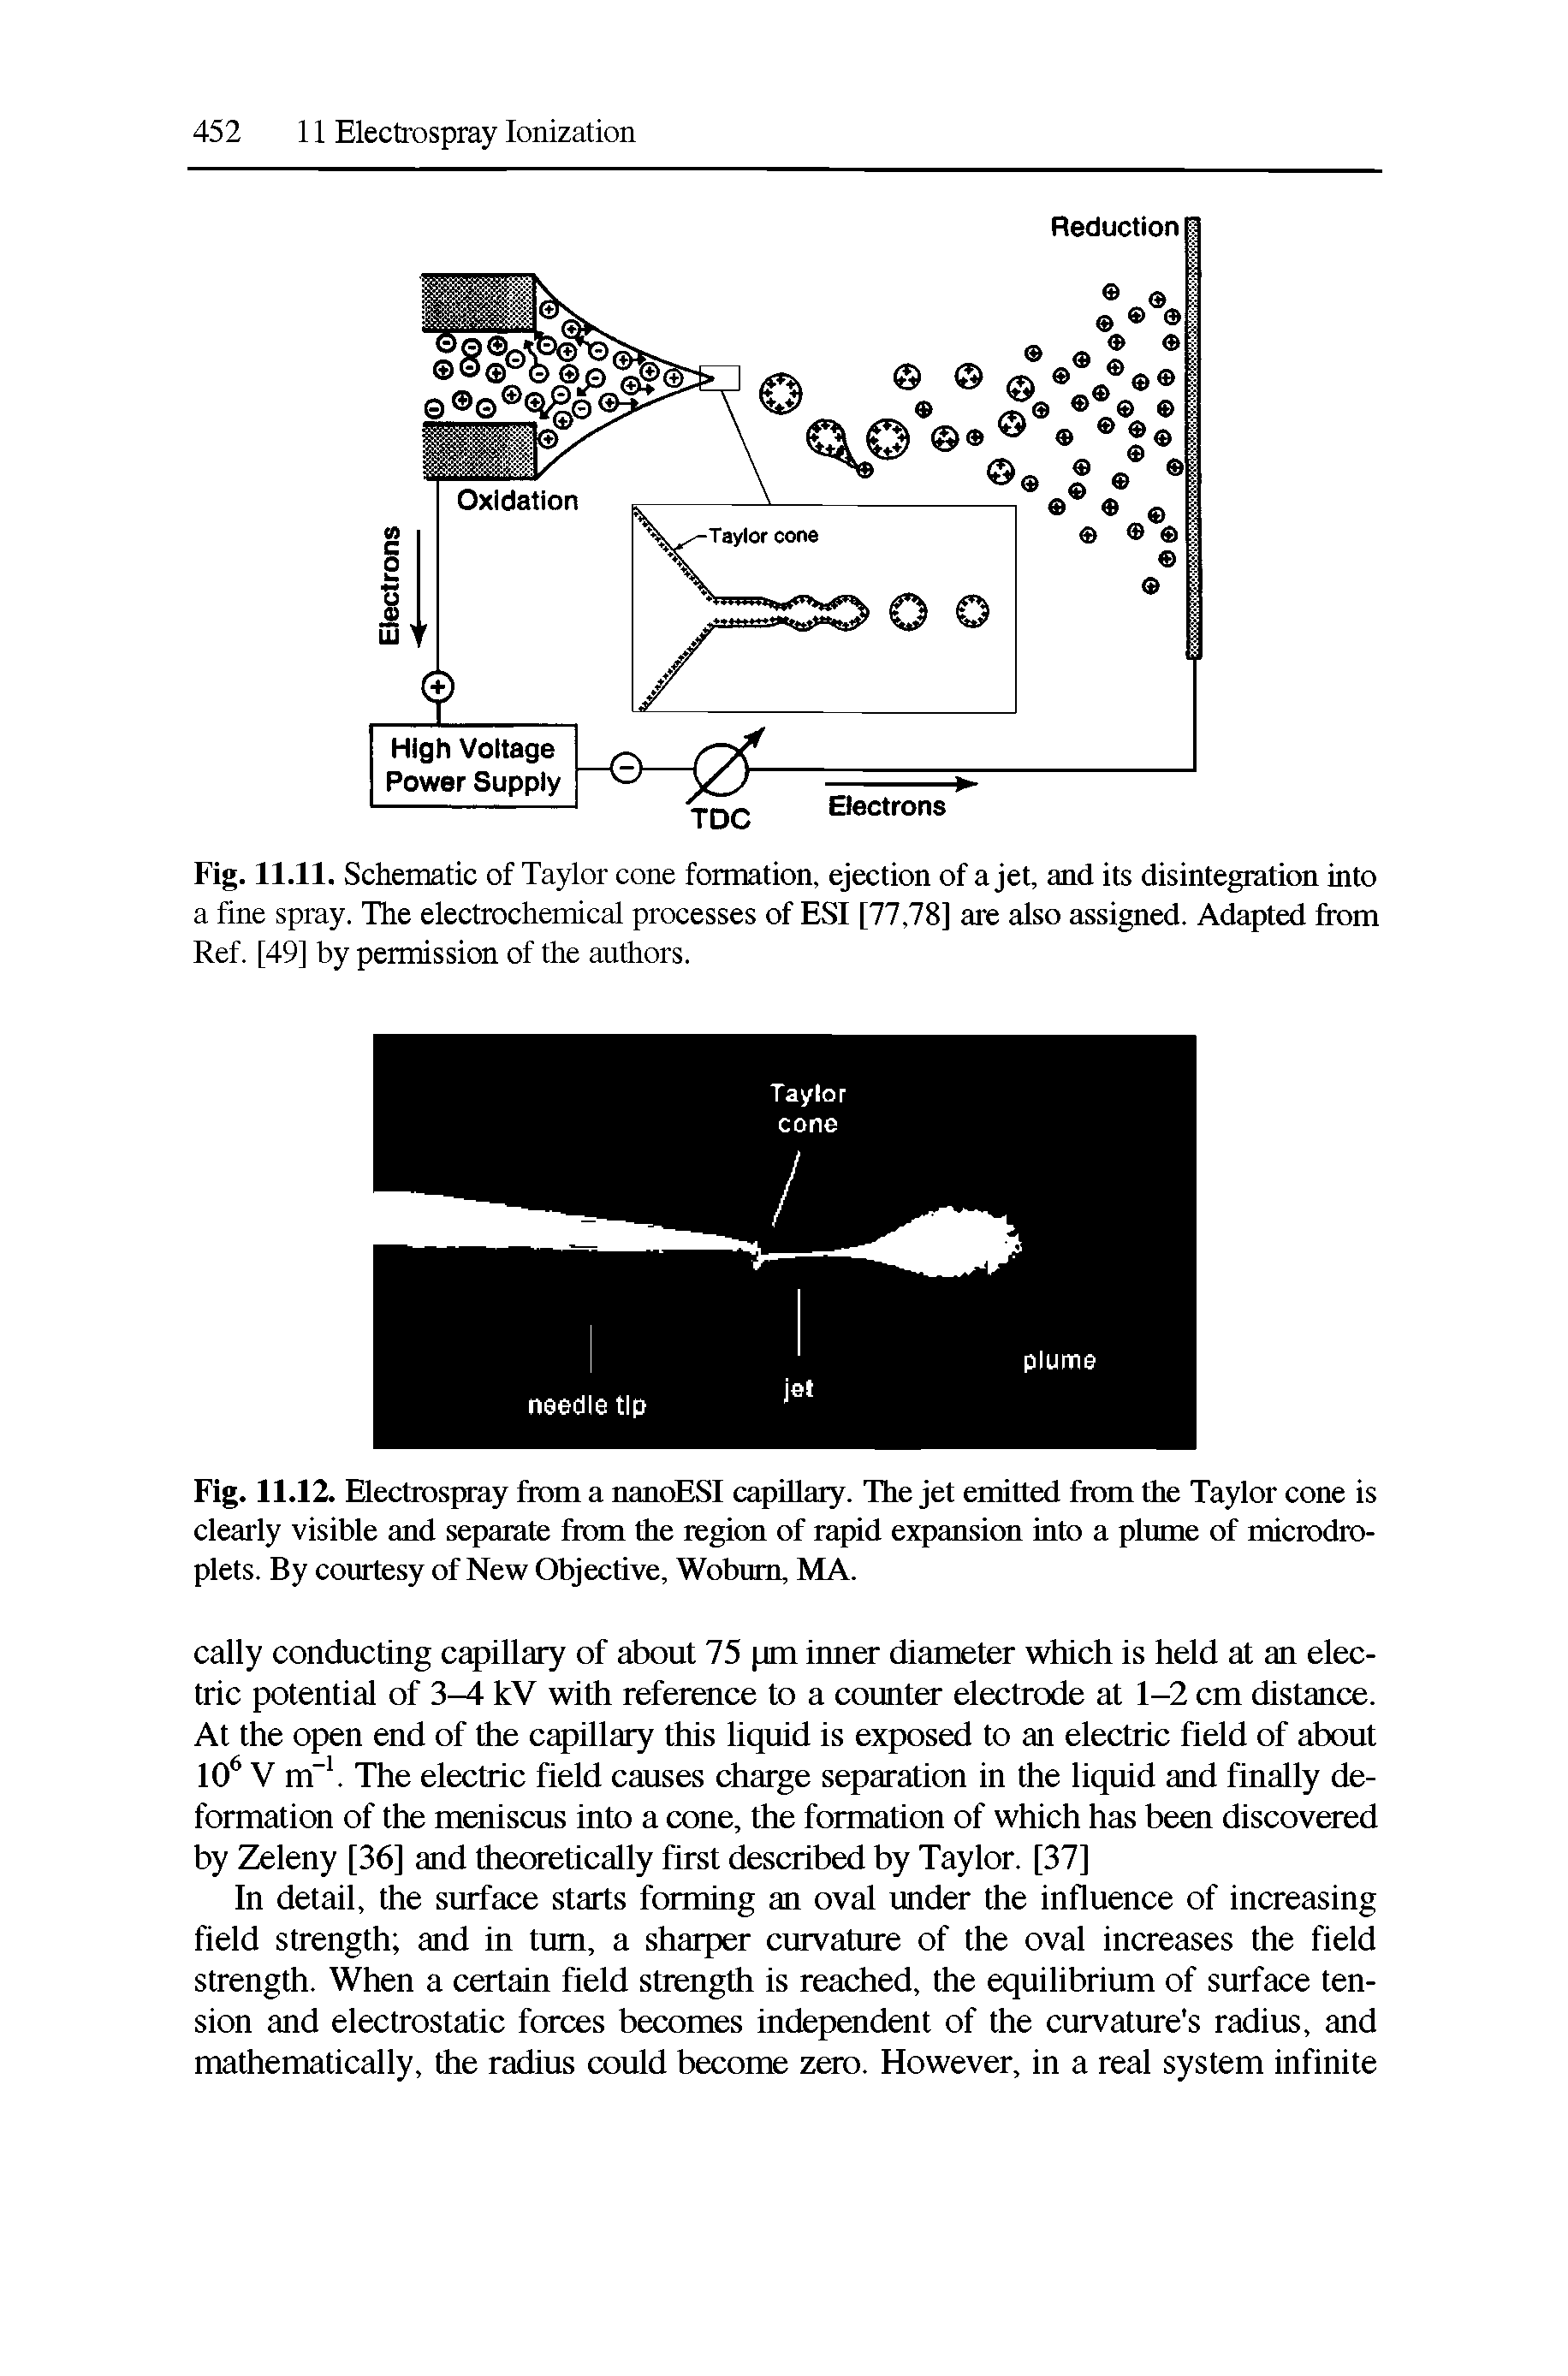 Fig. 11.12. Electrospray from a nanoESI capillary. The jet emitted from the Taylor cone is clearly visible and separate from the region of rapid expansion into a plume of microdroplets. By courtesy of New Objective, Woburn, MA.